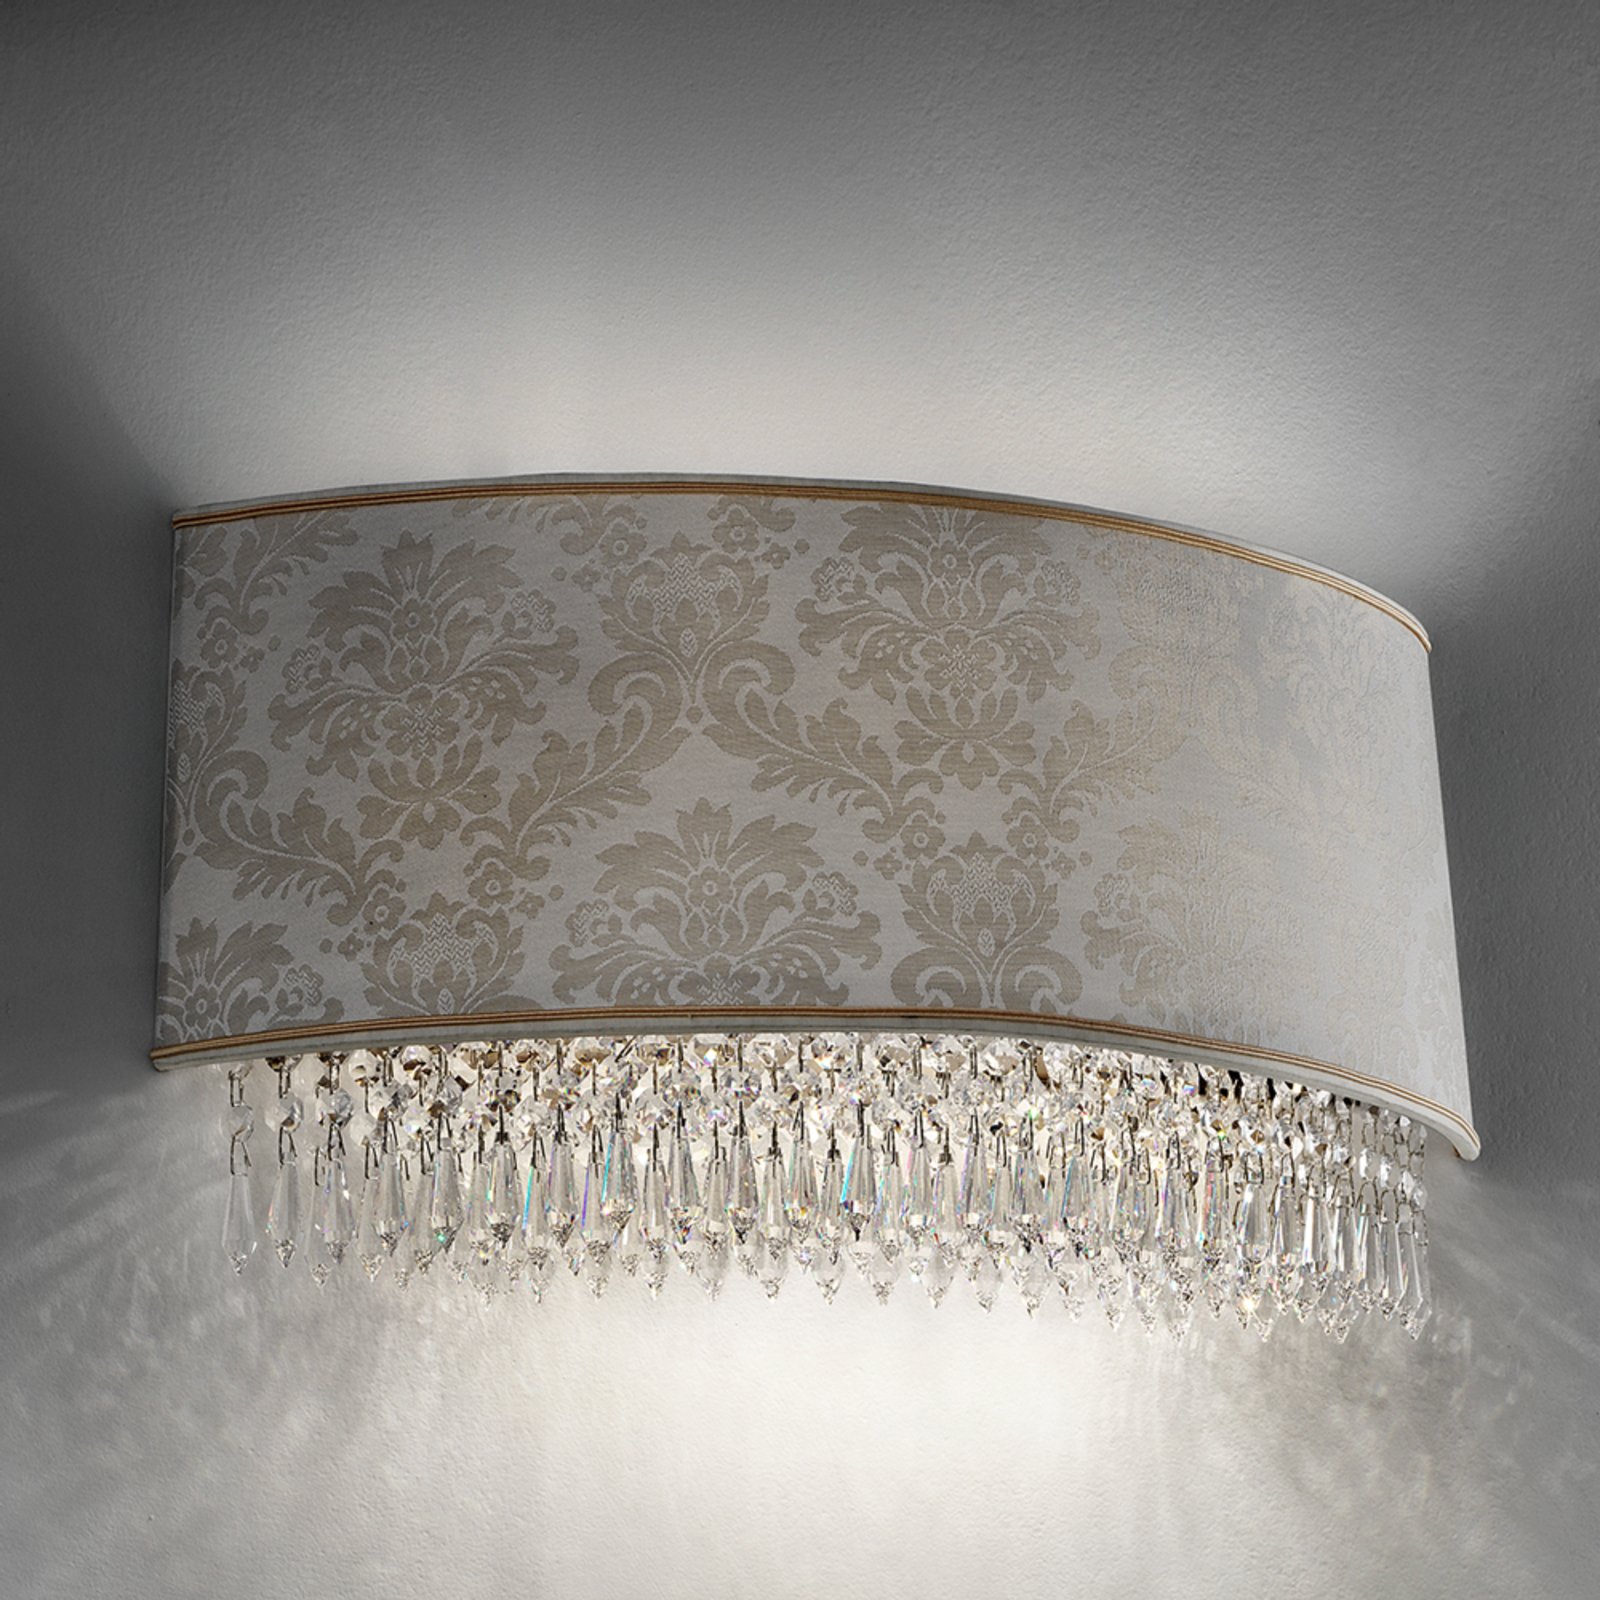 50 cm wide wall lamp Glassé with damask lampshade